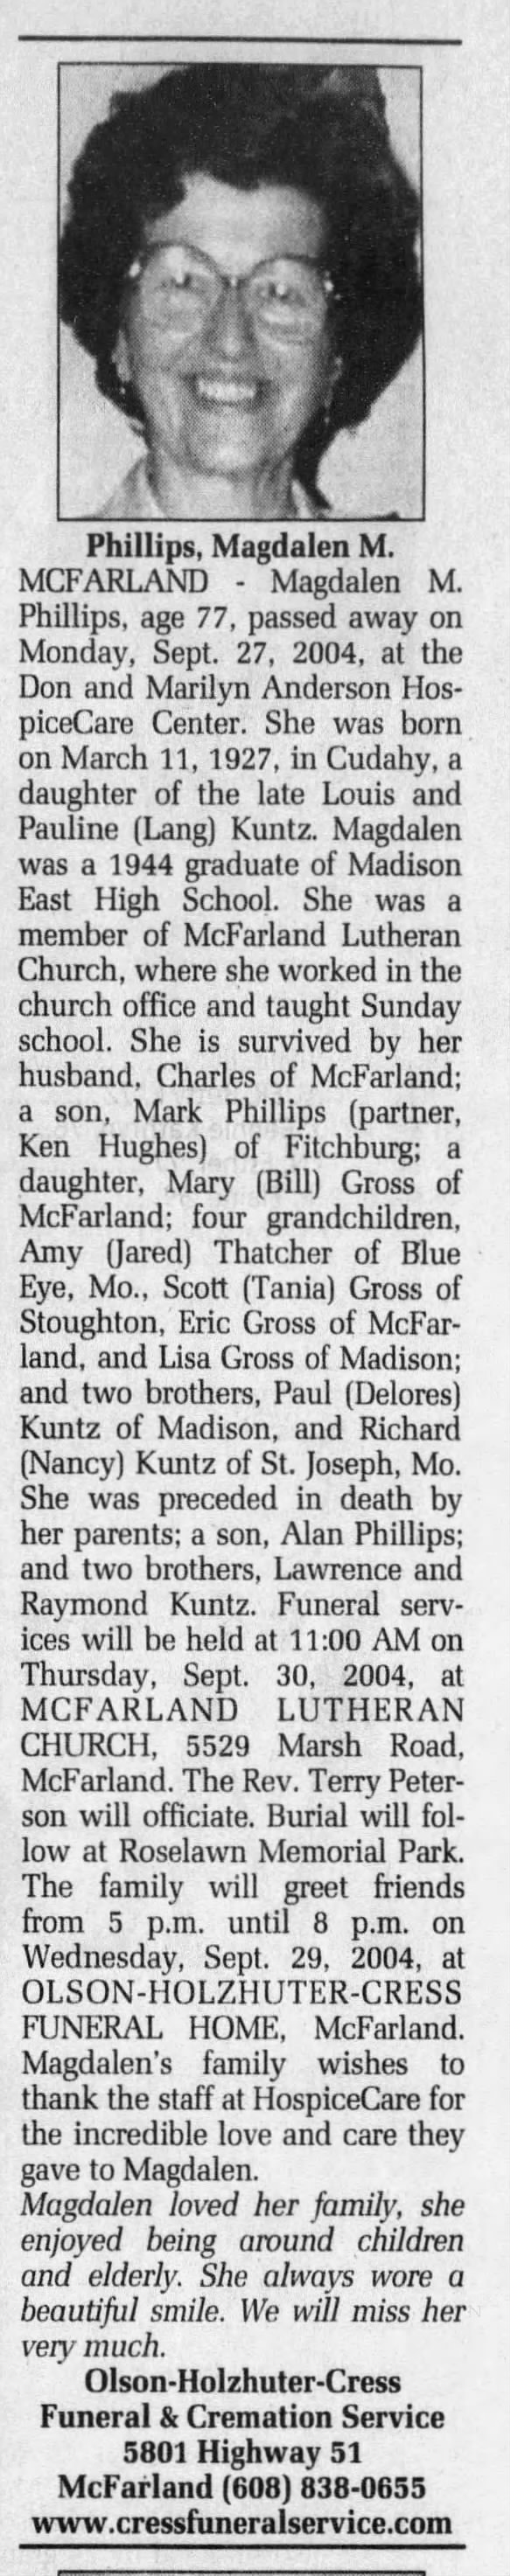 Obituary for Magdalen M. Phillips, 1927-2004 (Aged 77)